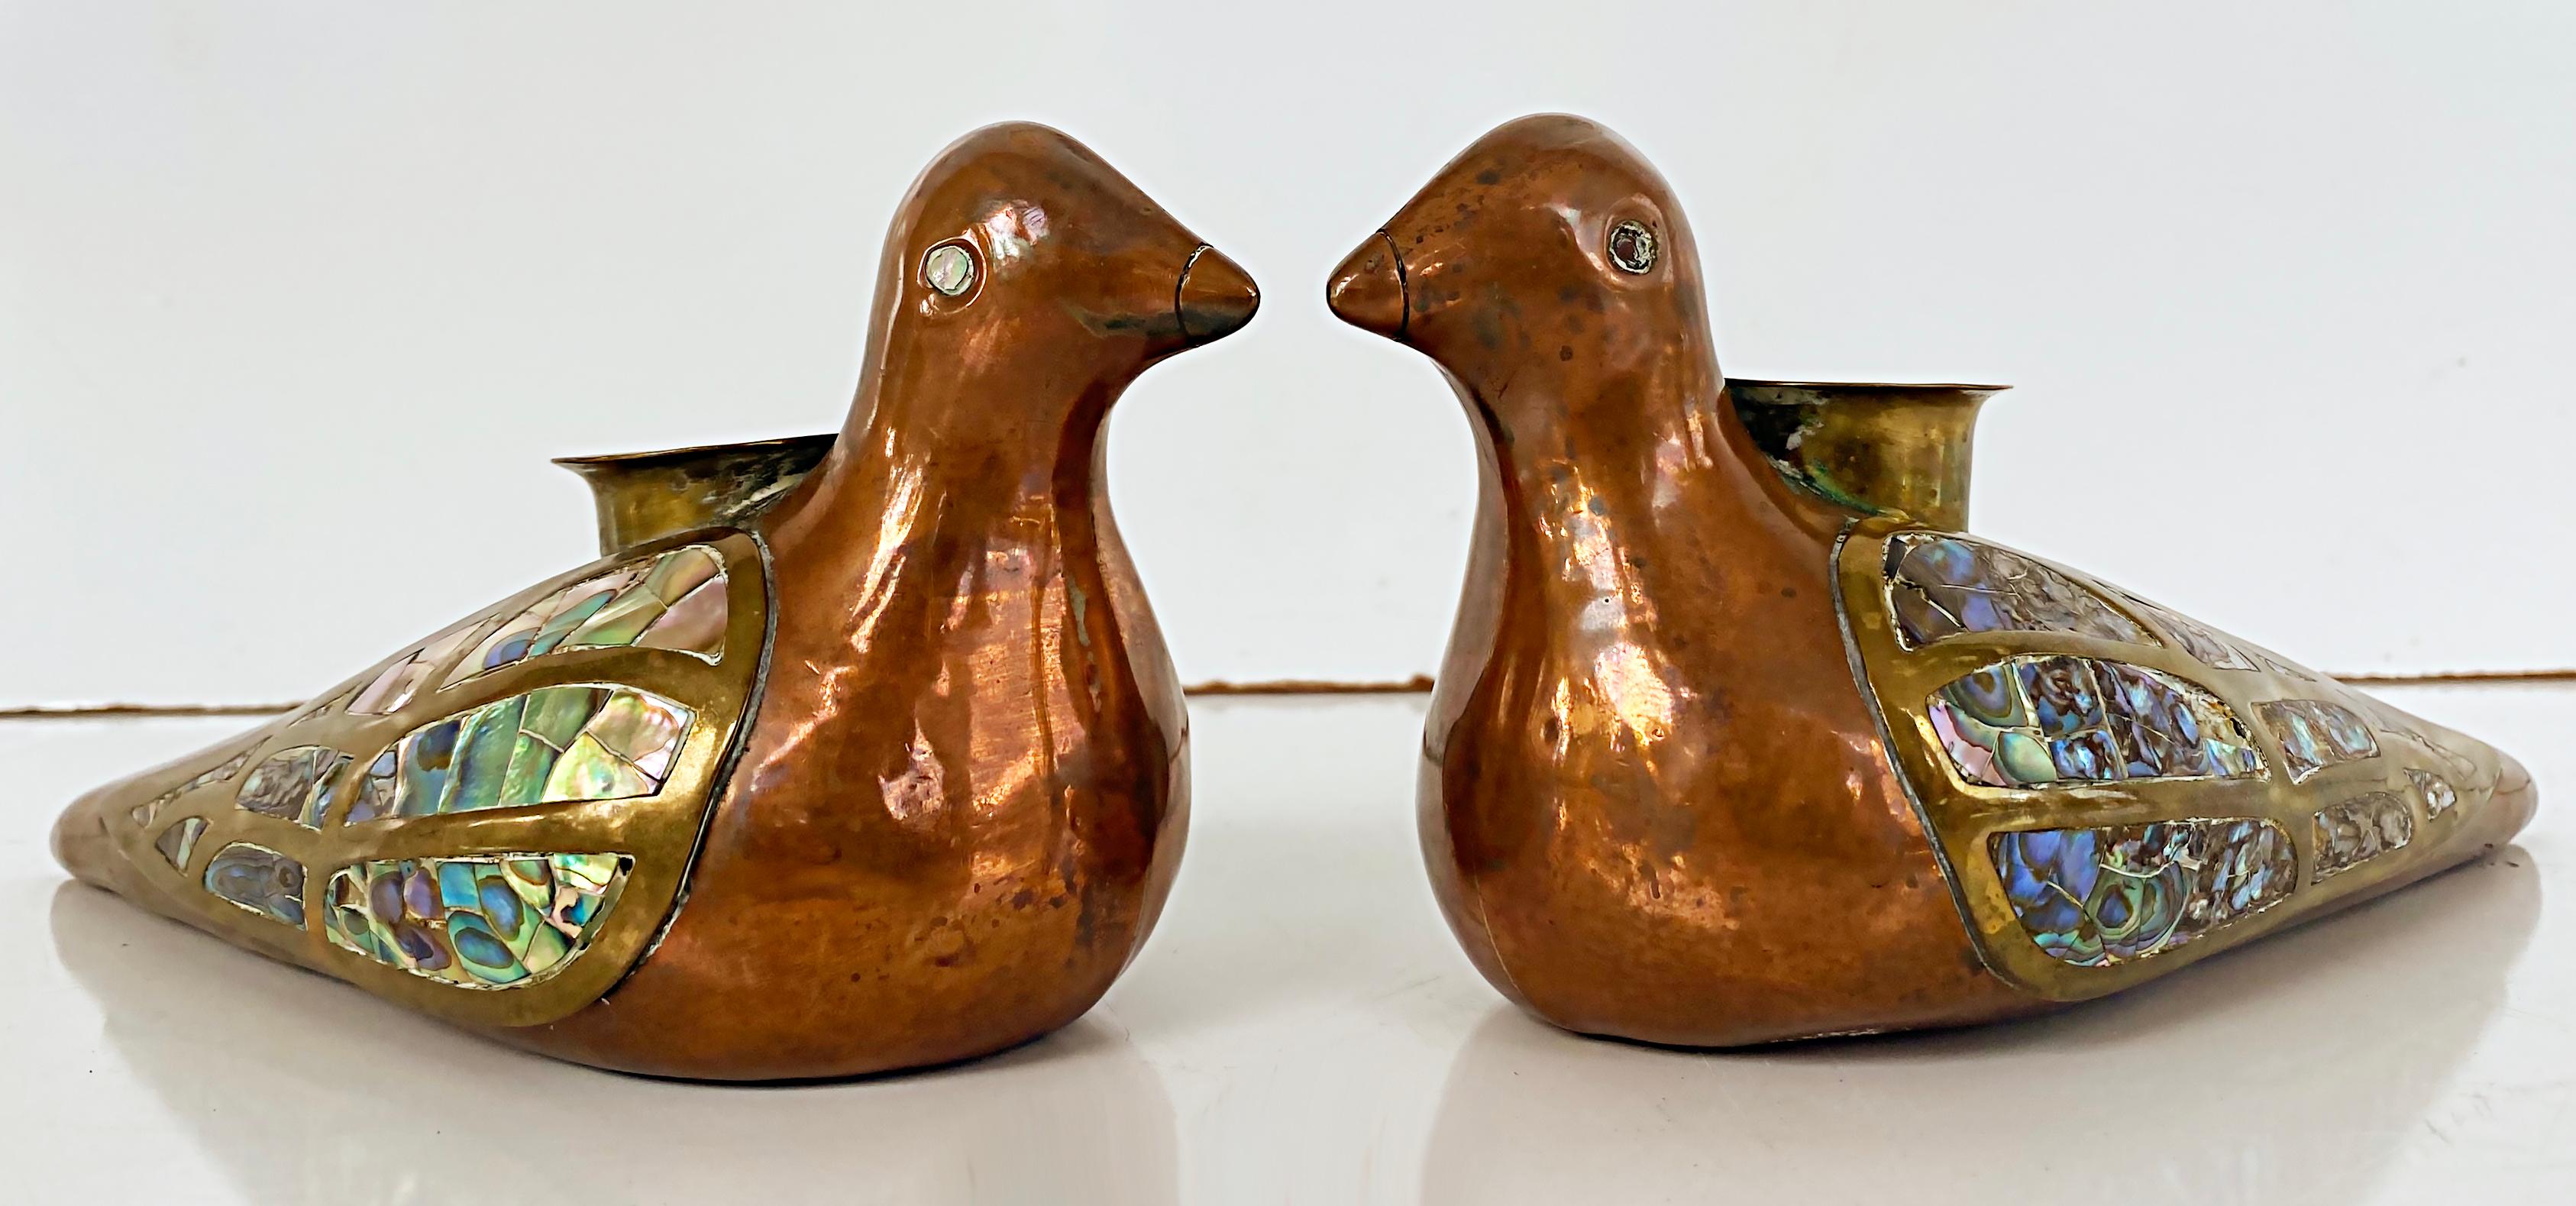 Mexican Mid-century Brass Copper Abalone Bird Candlesticks, Pair

Offered for sale is a pair of Mexican mid-century modern mixed metal brass, copper, and abalone shell figural candlesticks of birds c.1965. Although unmarked, these are reminiscent